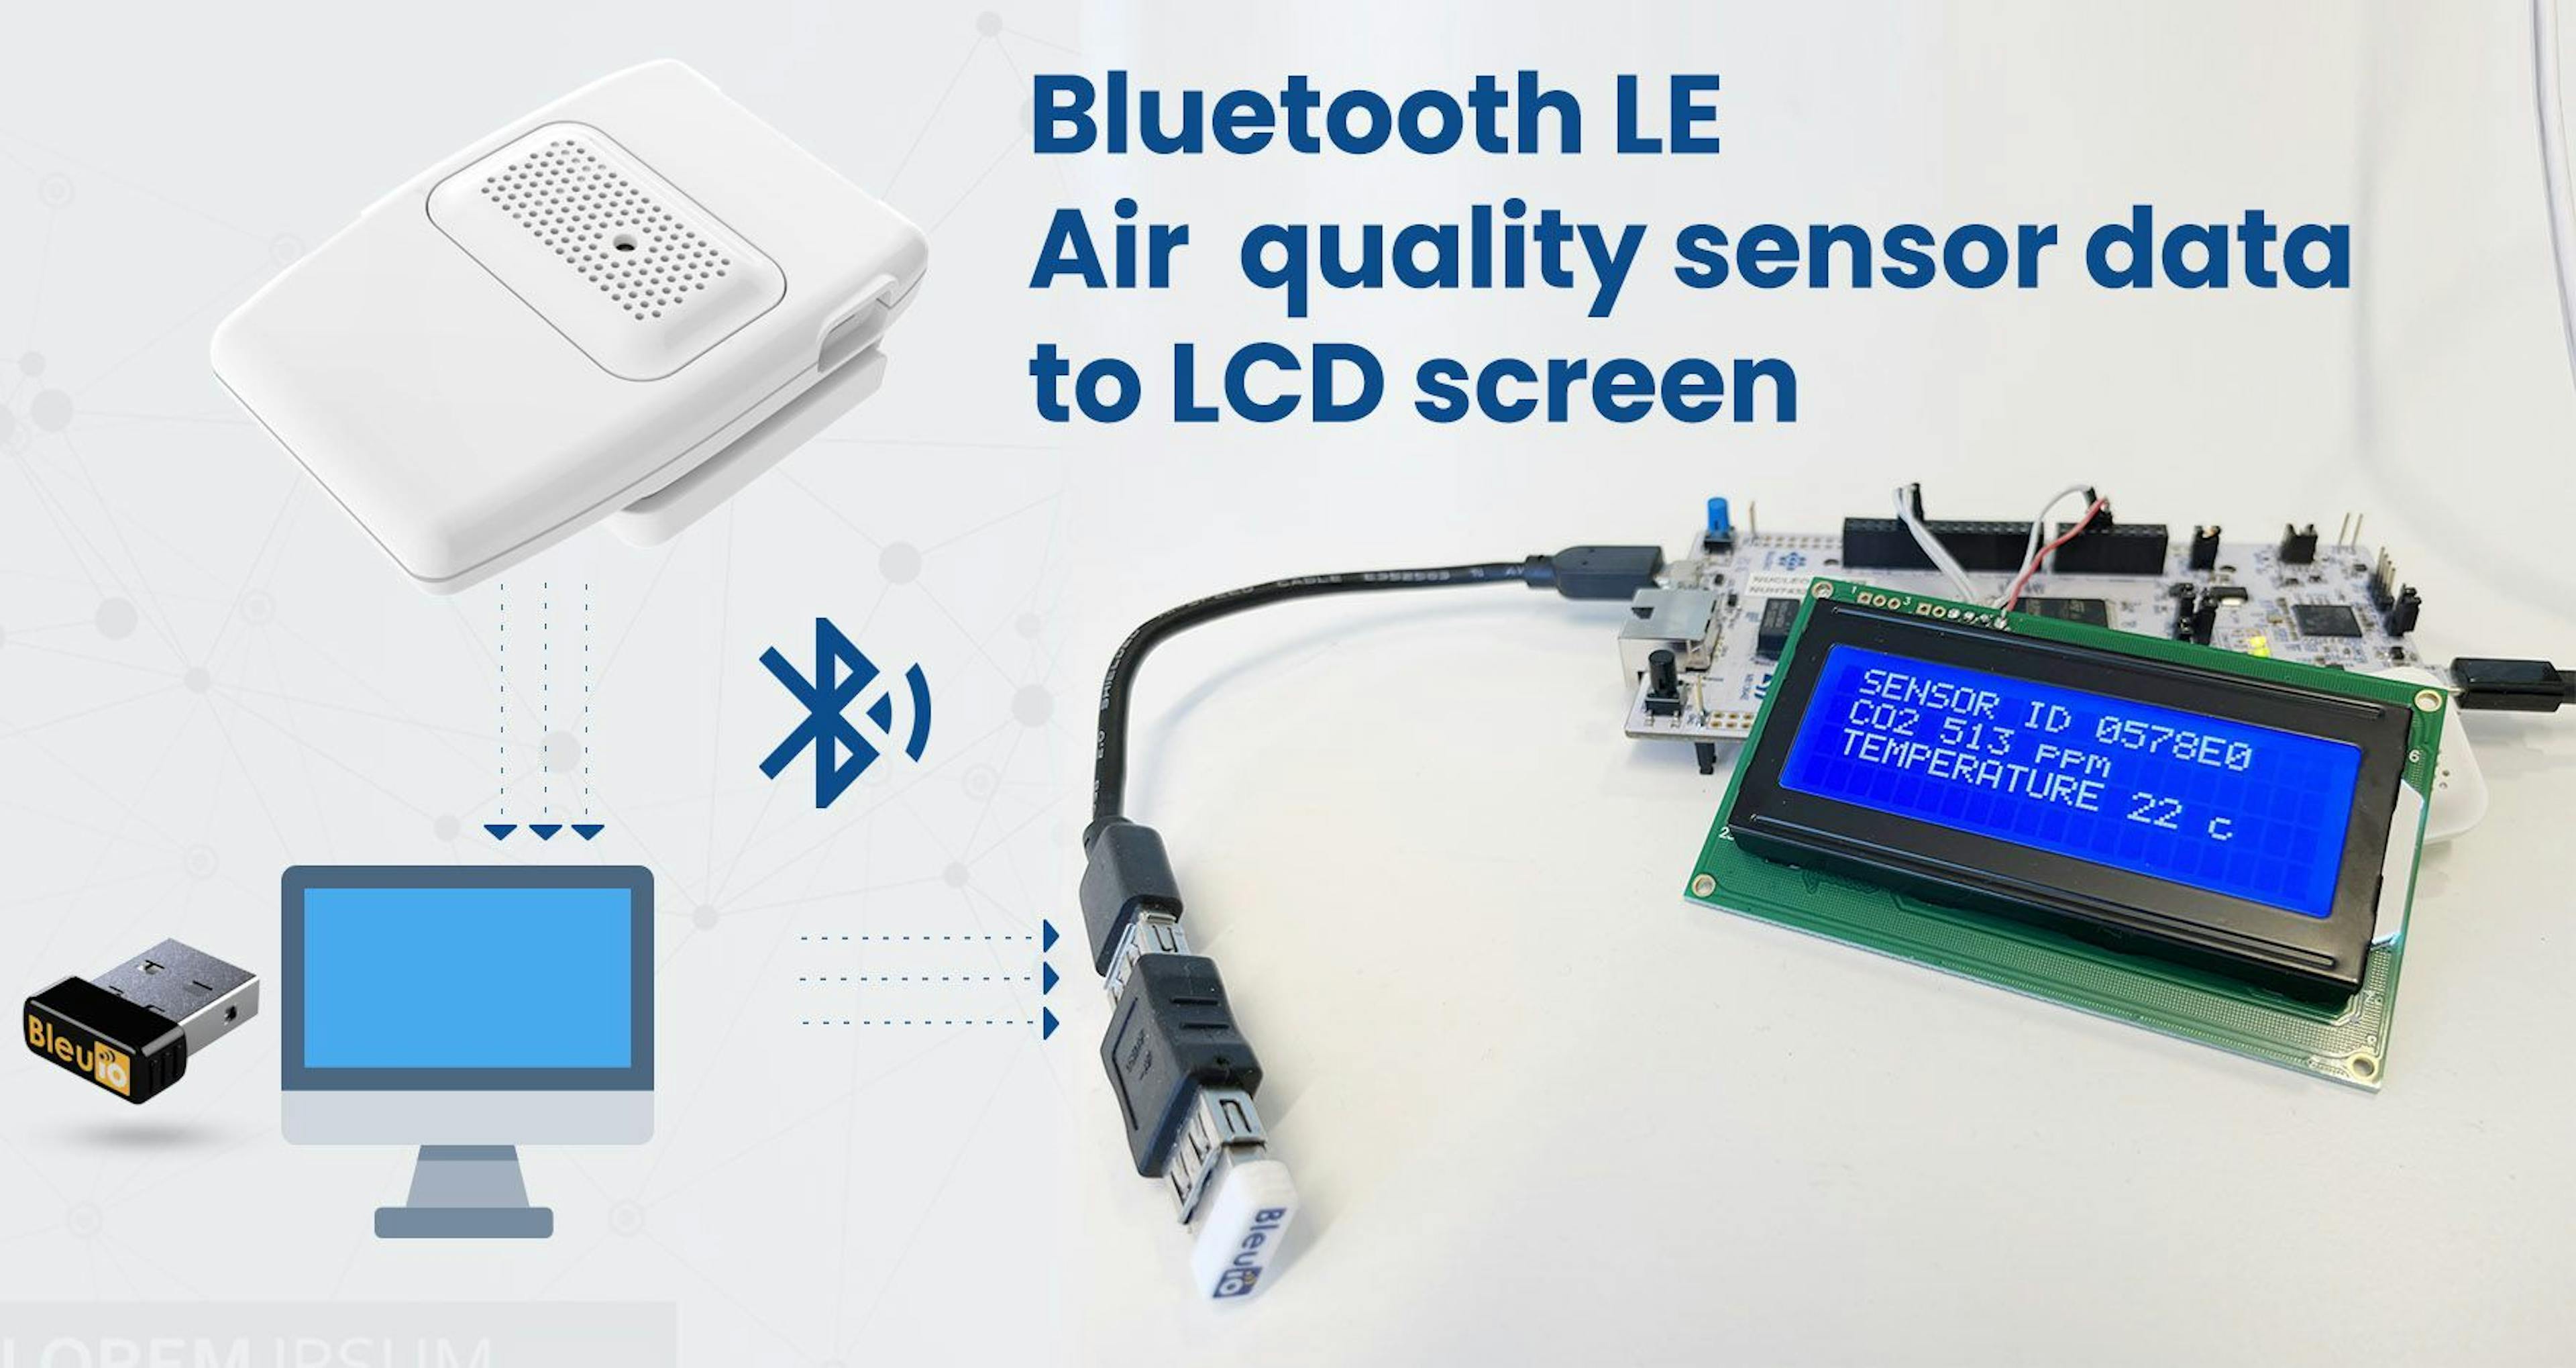 /show-bluetooth-le-sensor-readings-on-lcd-screen-connected-to-stm32 feature image